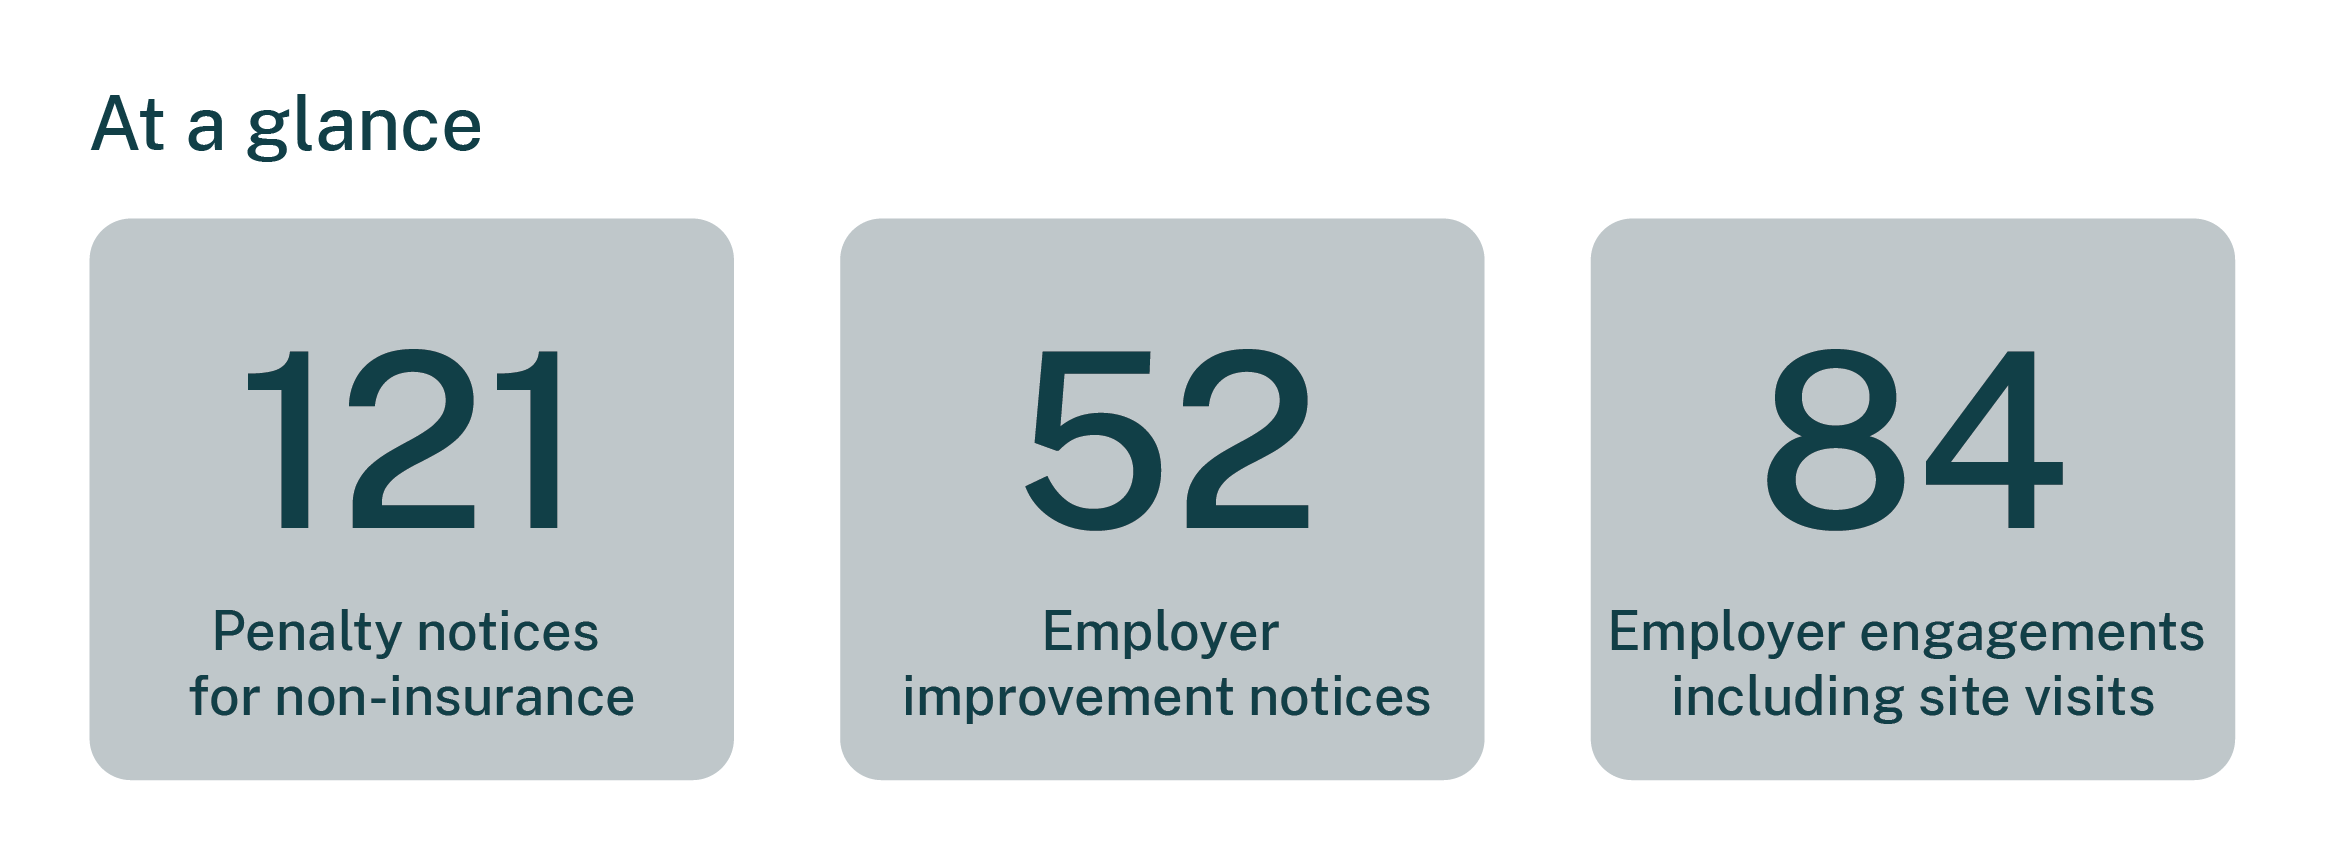 At a glance, SIRA issued 121 penalty notices for non-insurance, 52 employer improvement notices and 84 employer engagements include site visits